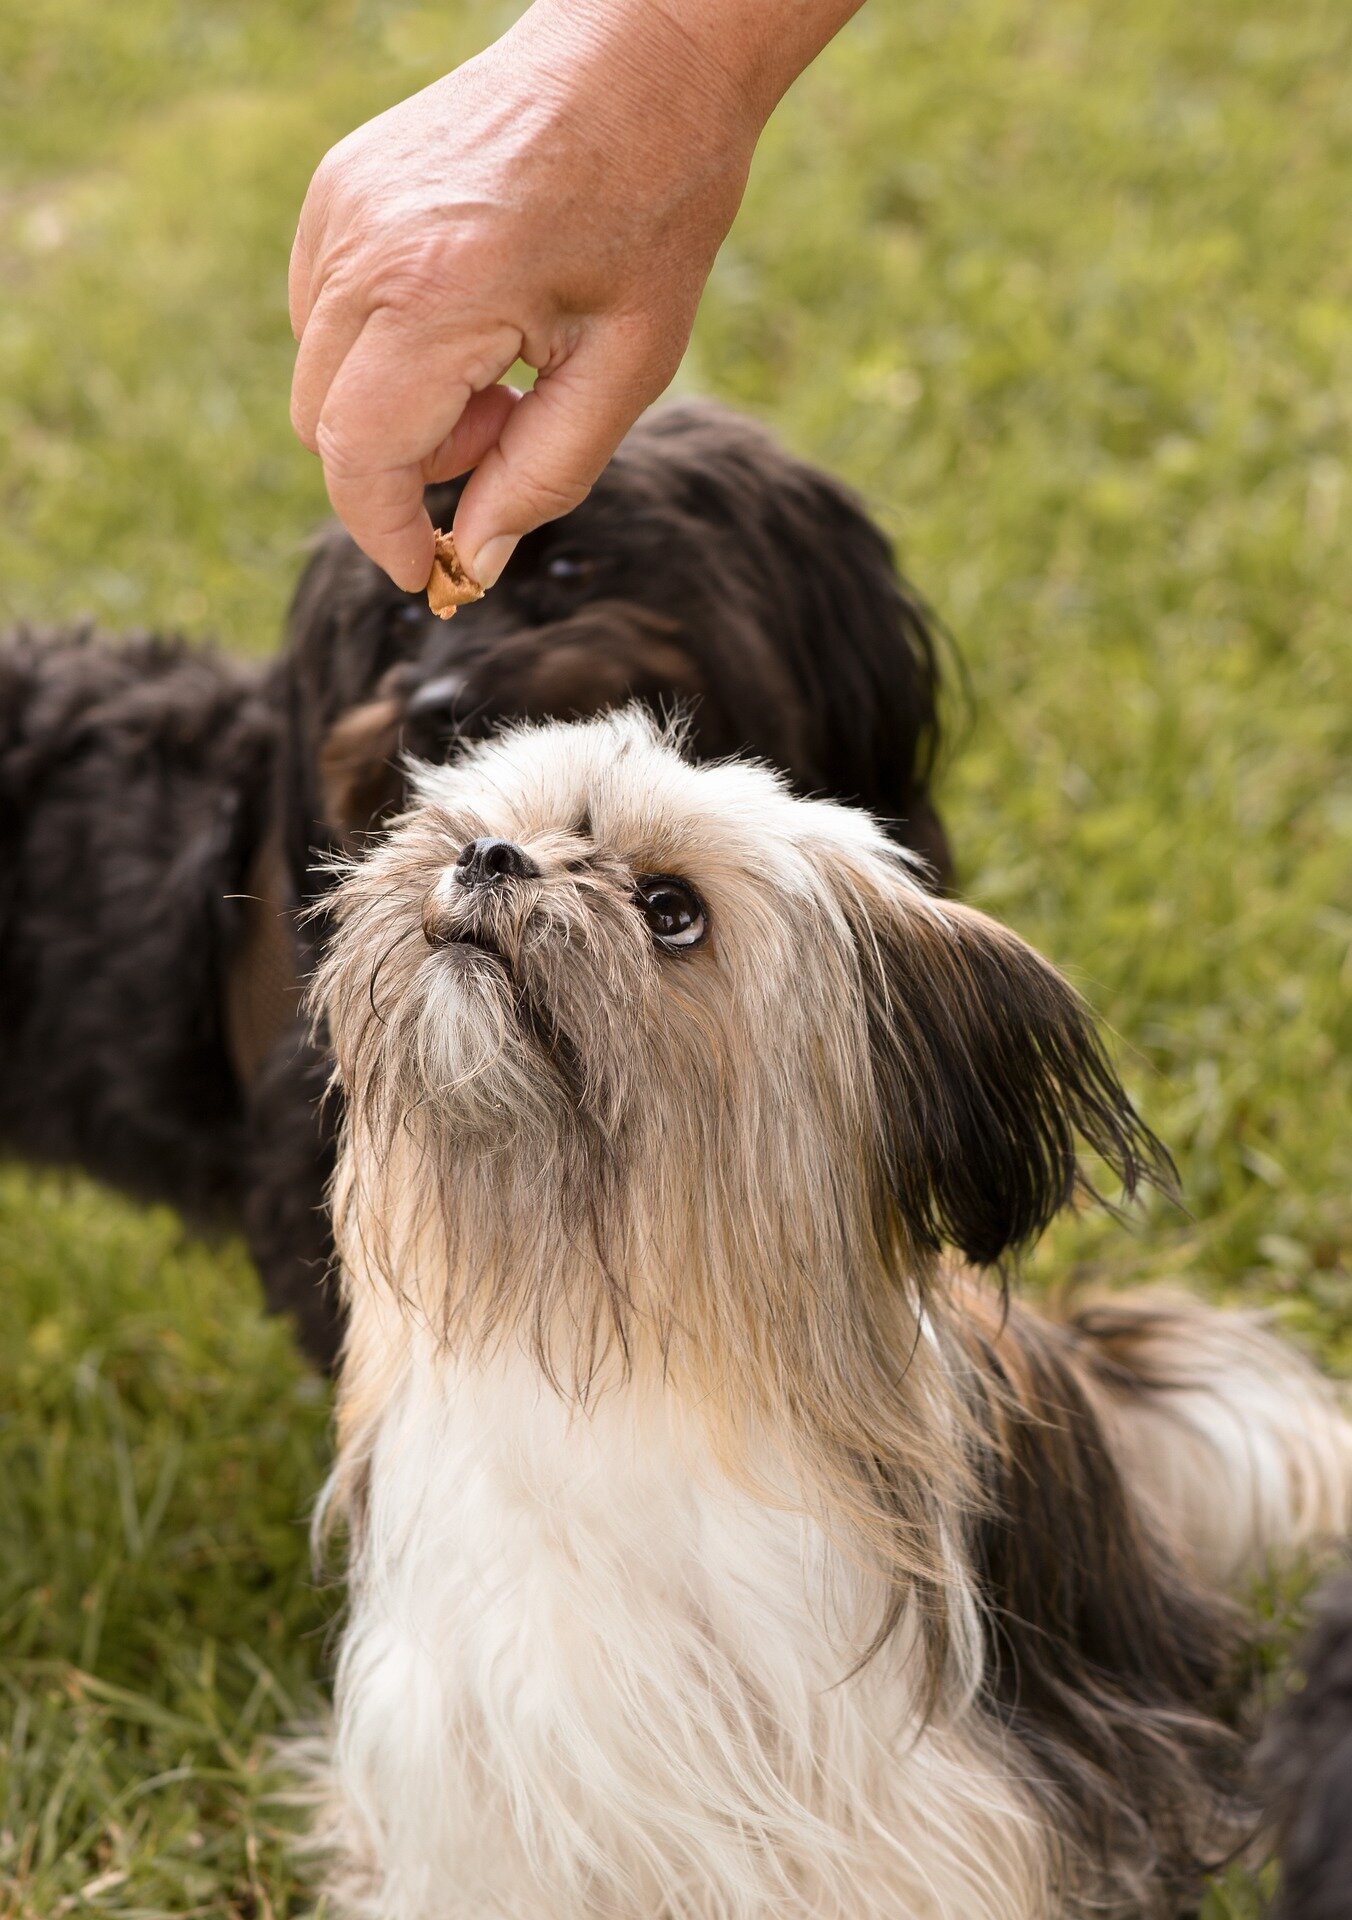 #Feeding dogs raw meat associated with increased presence of antibiotic-resistant bacteria